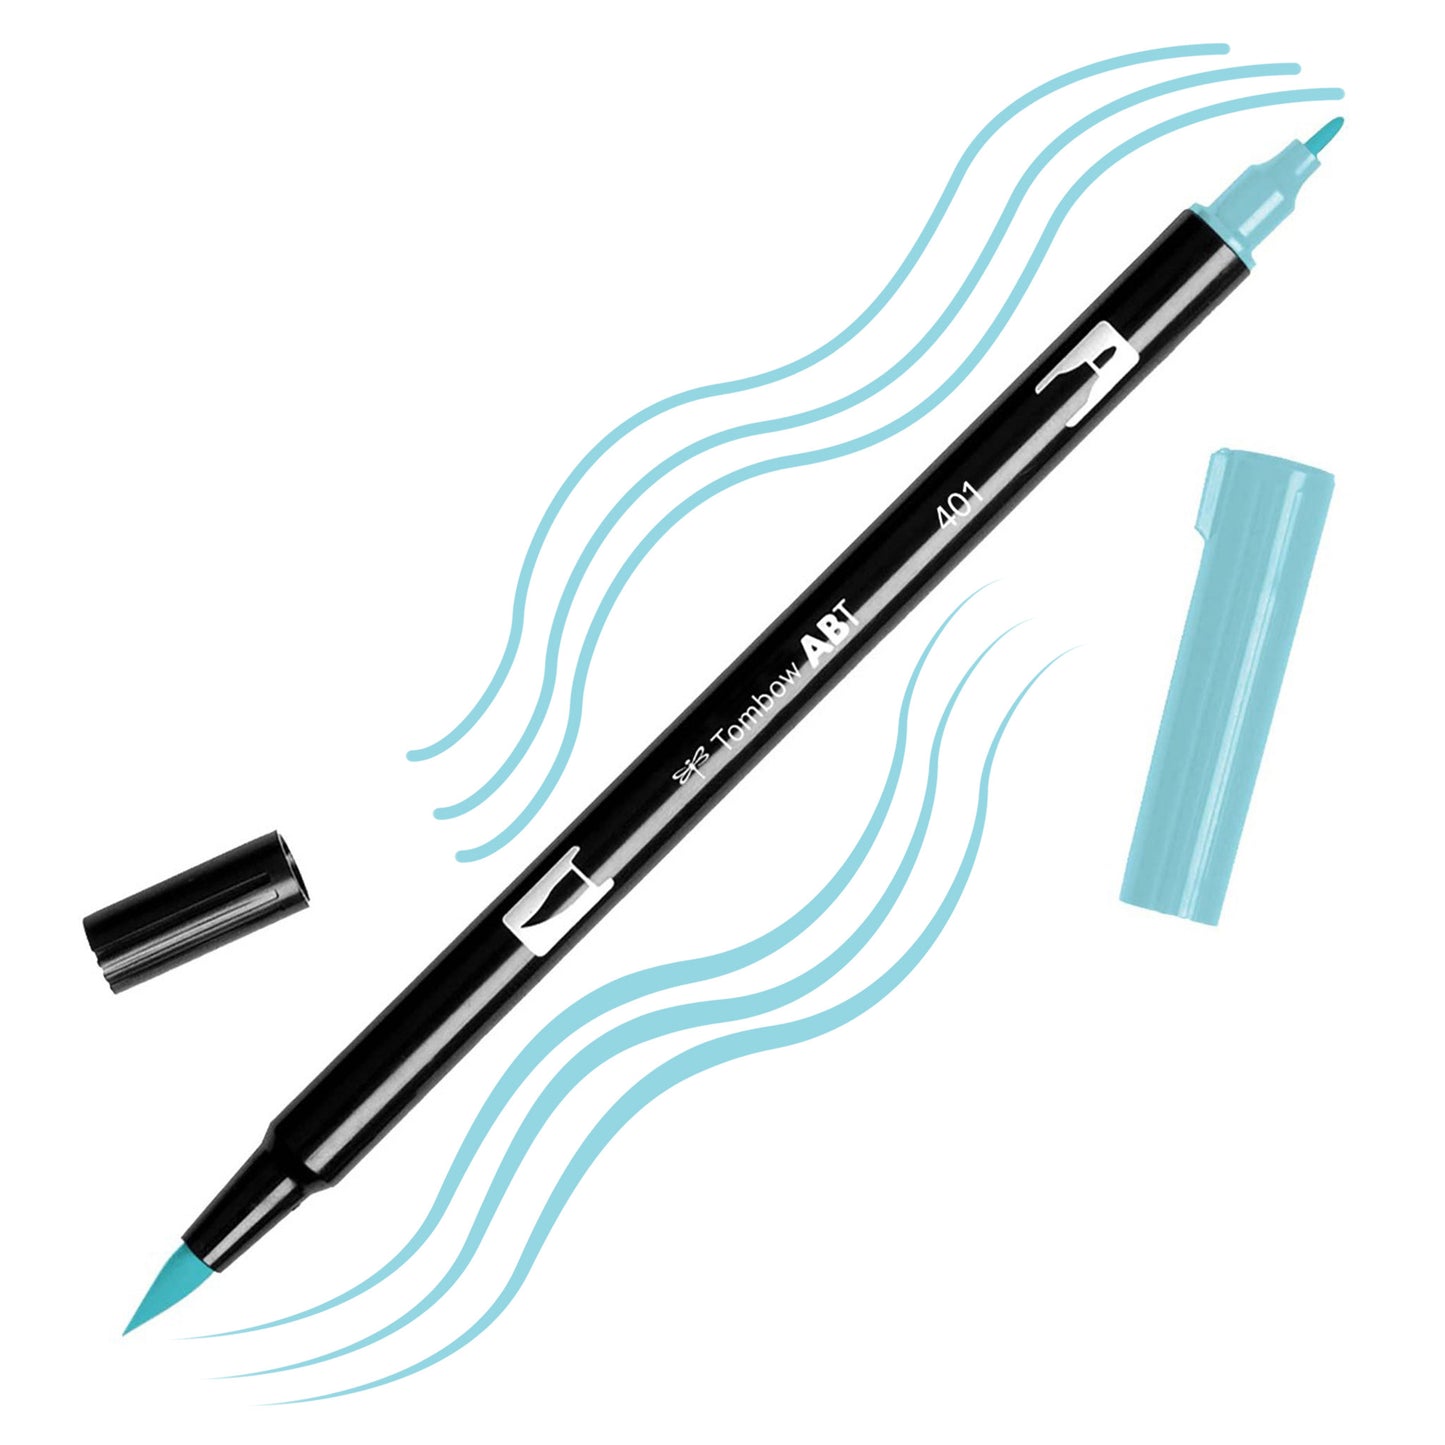 Aqua Tombow double-headed brush-pen with a flexible nylon fiber brush tip and a fine tip against a white background with Aqua strokes